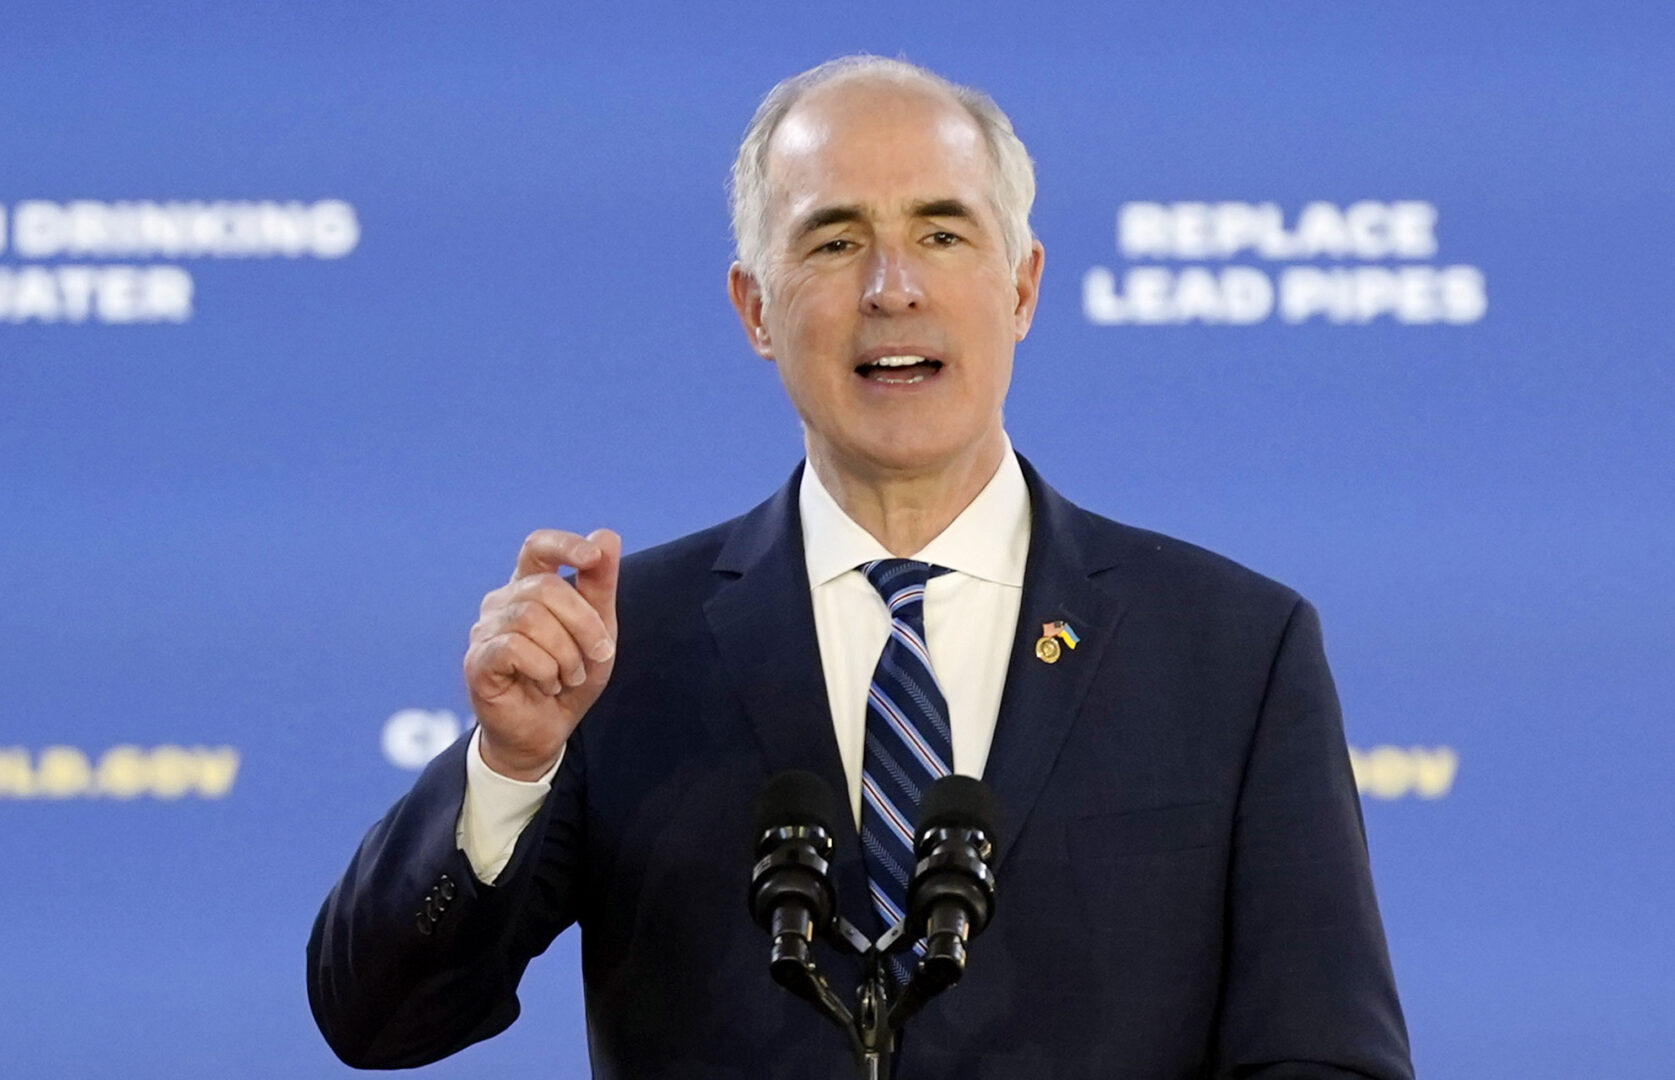 Sen. Bob Casey, D-Pa., speaks before President Joe Biden about his infrastructure agenda while announcing funding to upgrade Philadelphia's water facilities and replace lead pipes, Friday, Feb. 3, 2023, at Belmont Water Treatment Center in Philadelphia.